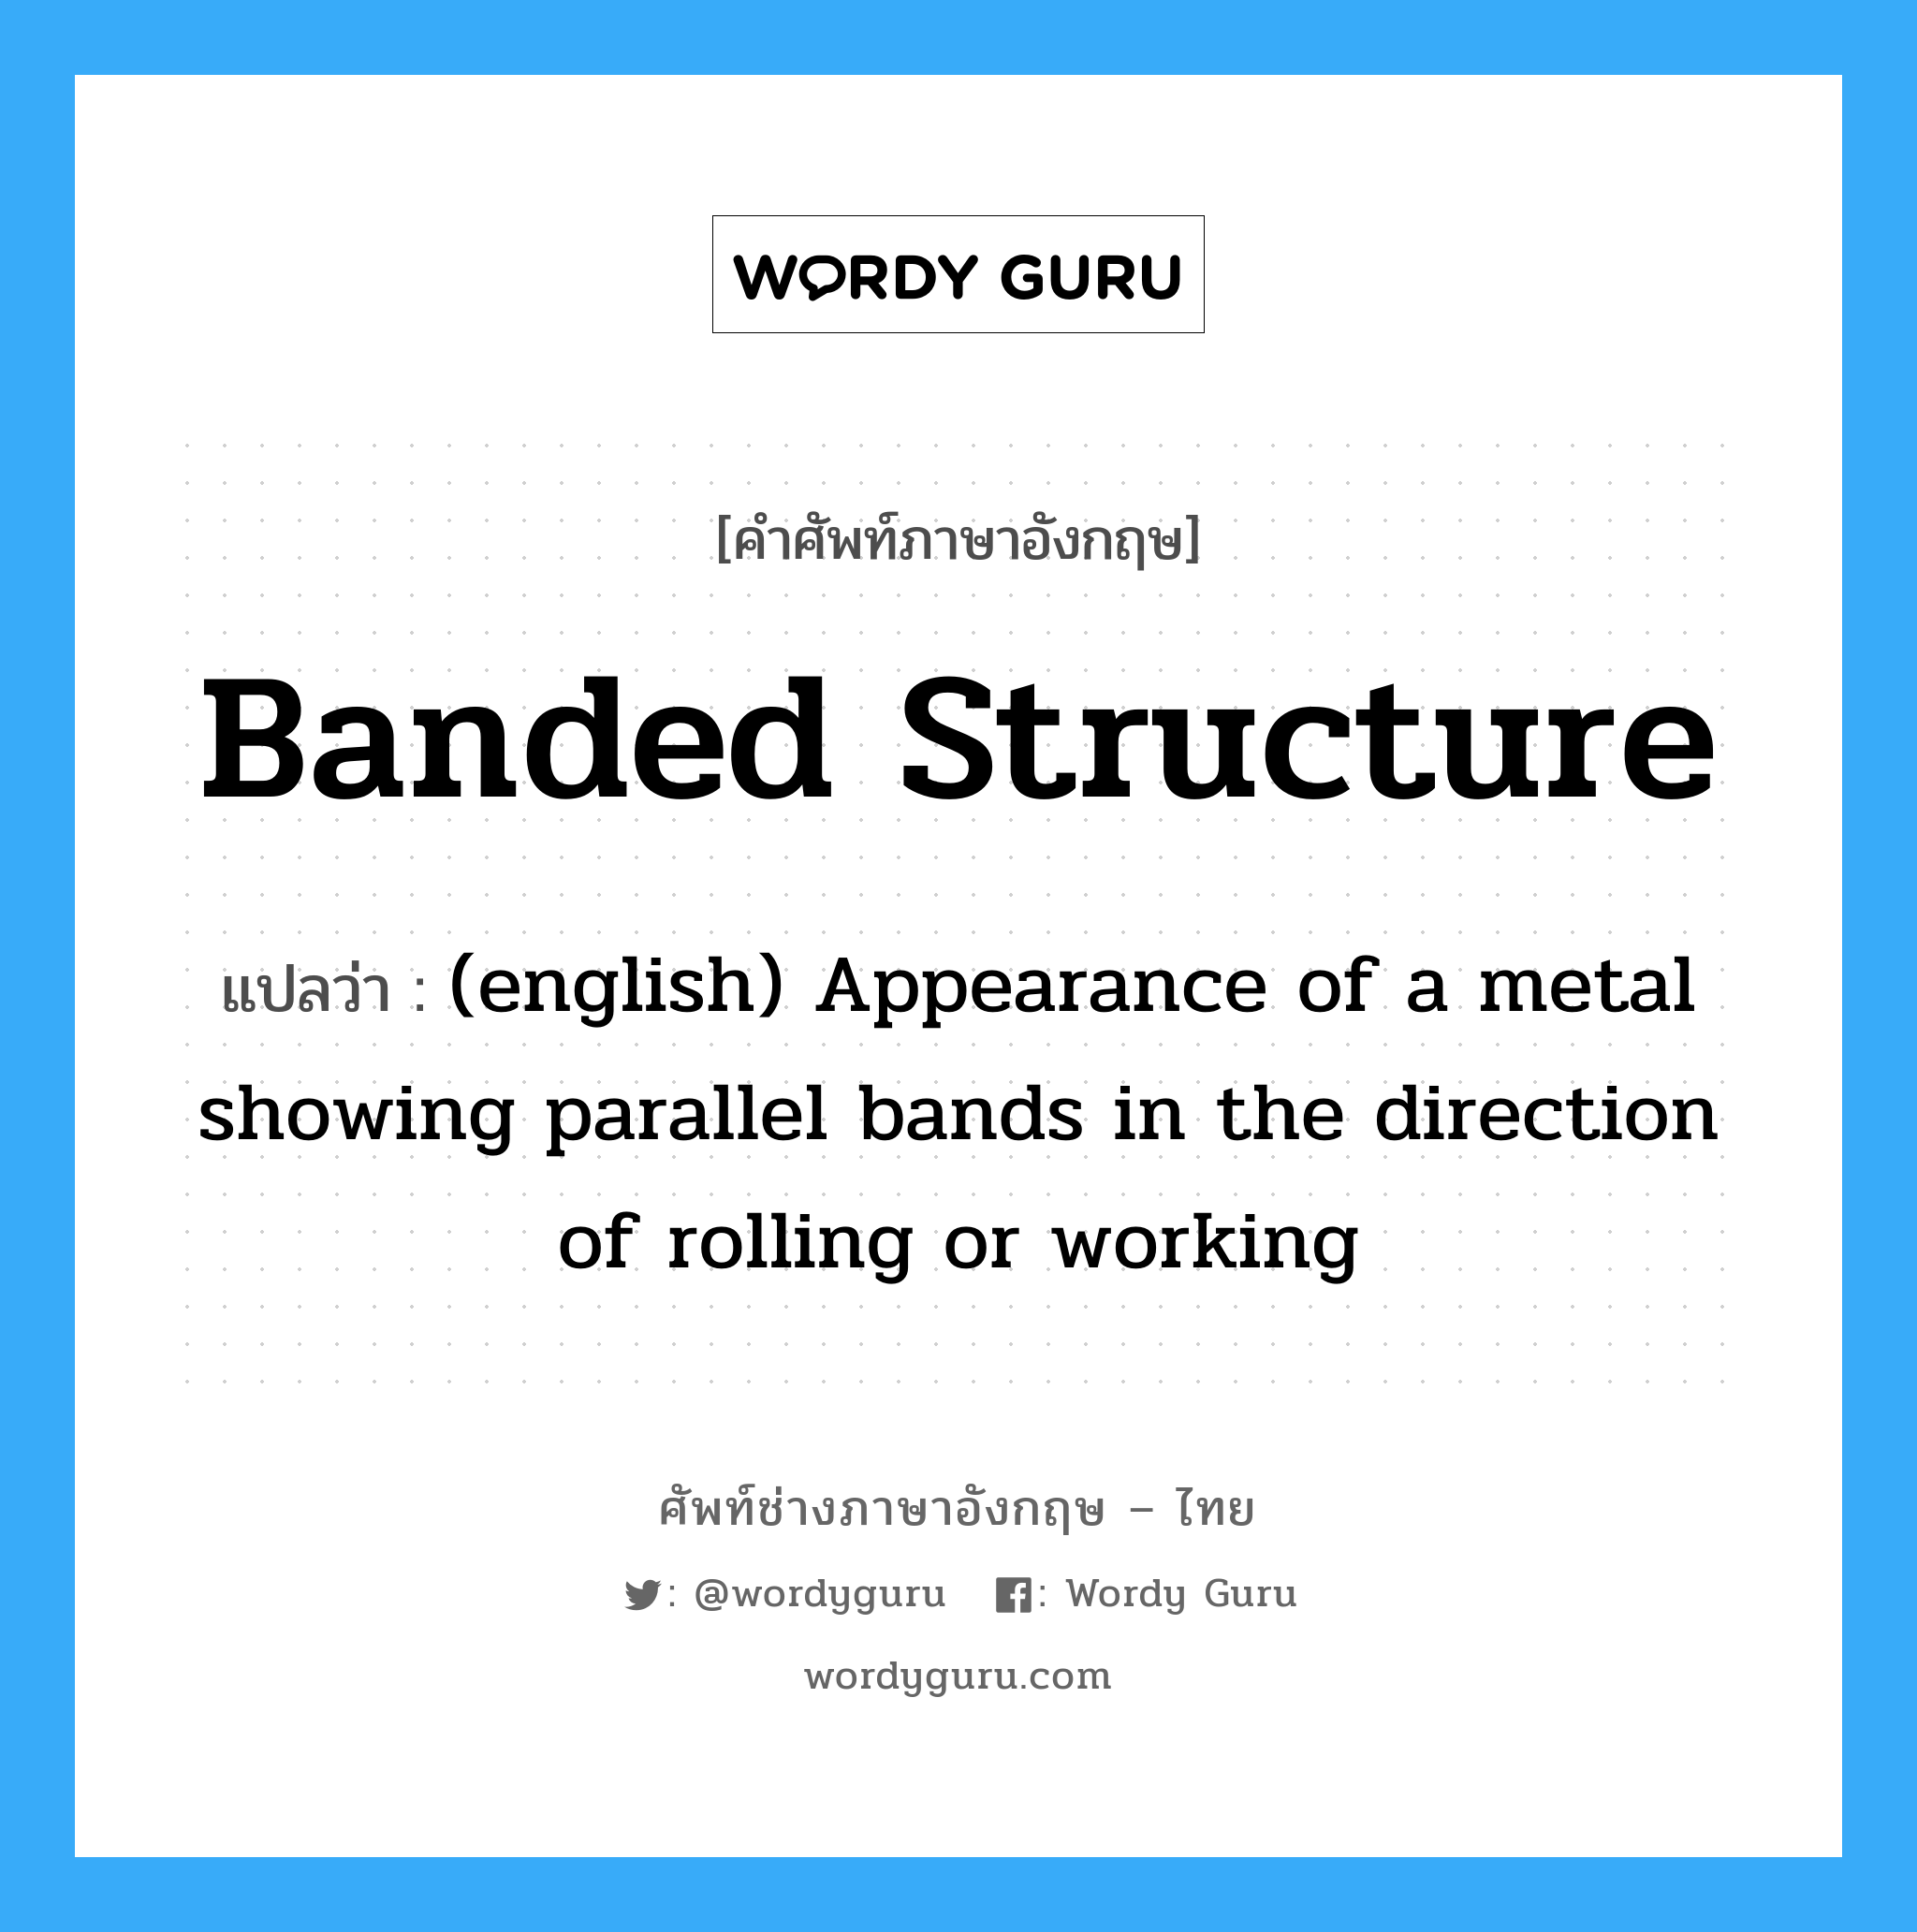 (english) Appearance of a metal showing parallel bands in the direction of rolling or working ภาษาอังกฤษ?, คำศัพท์ช่างภาษาอังกฤษ - ไทย (english) Appearance of a metal showing parallel bands in the direction of rolling or working คำศัพท์ภาษาอังกฤษ (english) Appearance of a metal showing parallel bands in the direction of rolling or working แปลว่า Banded Structure